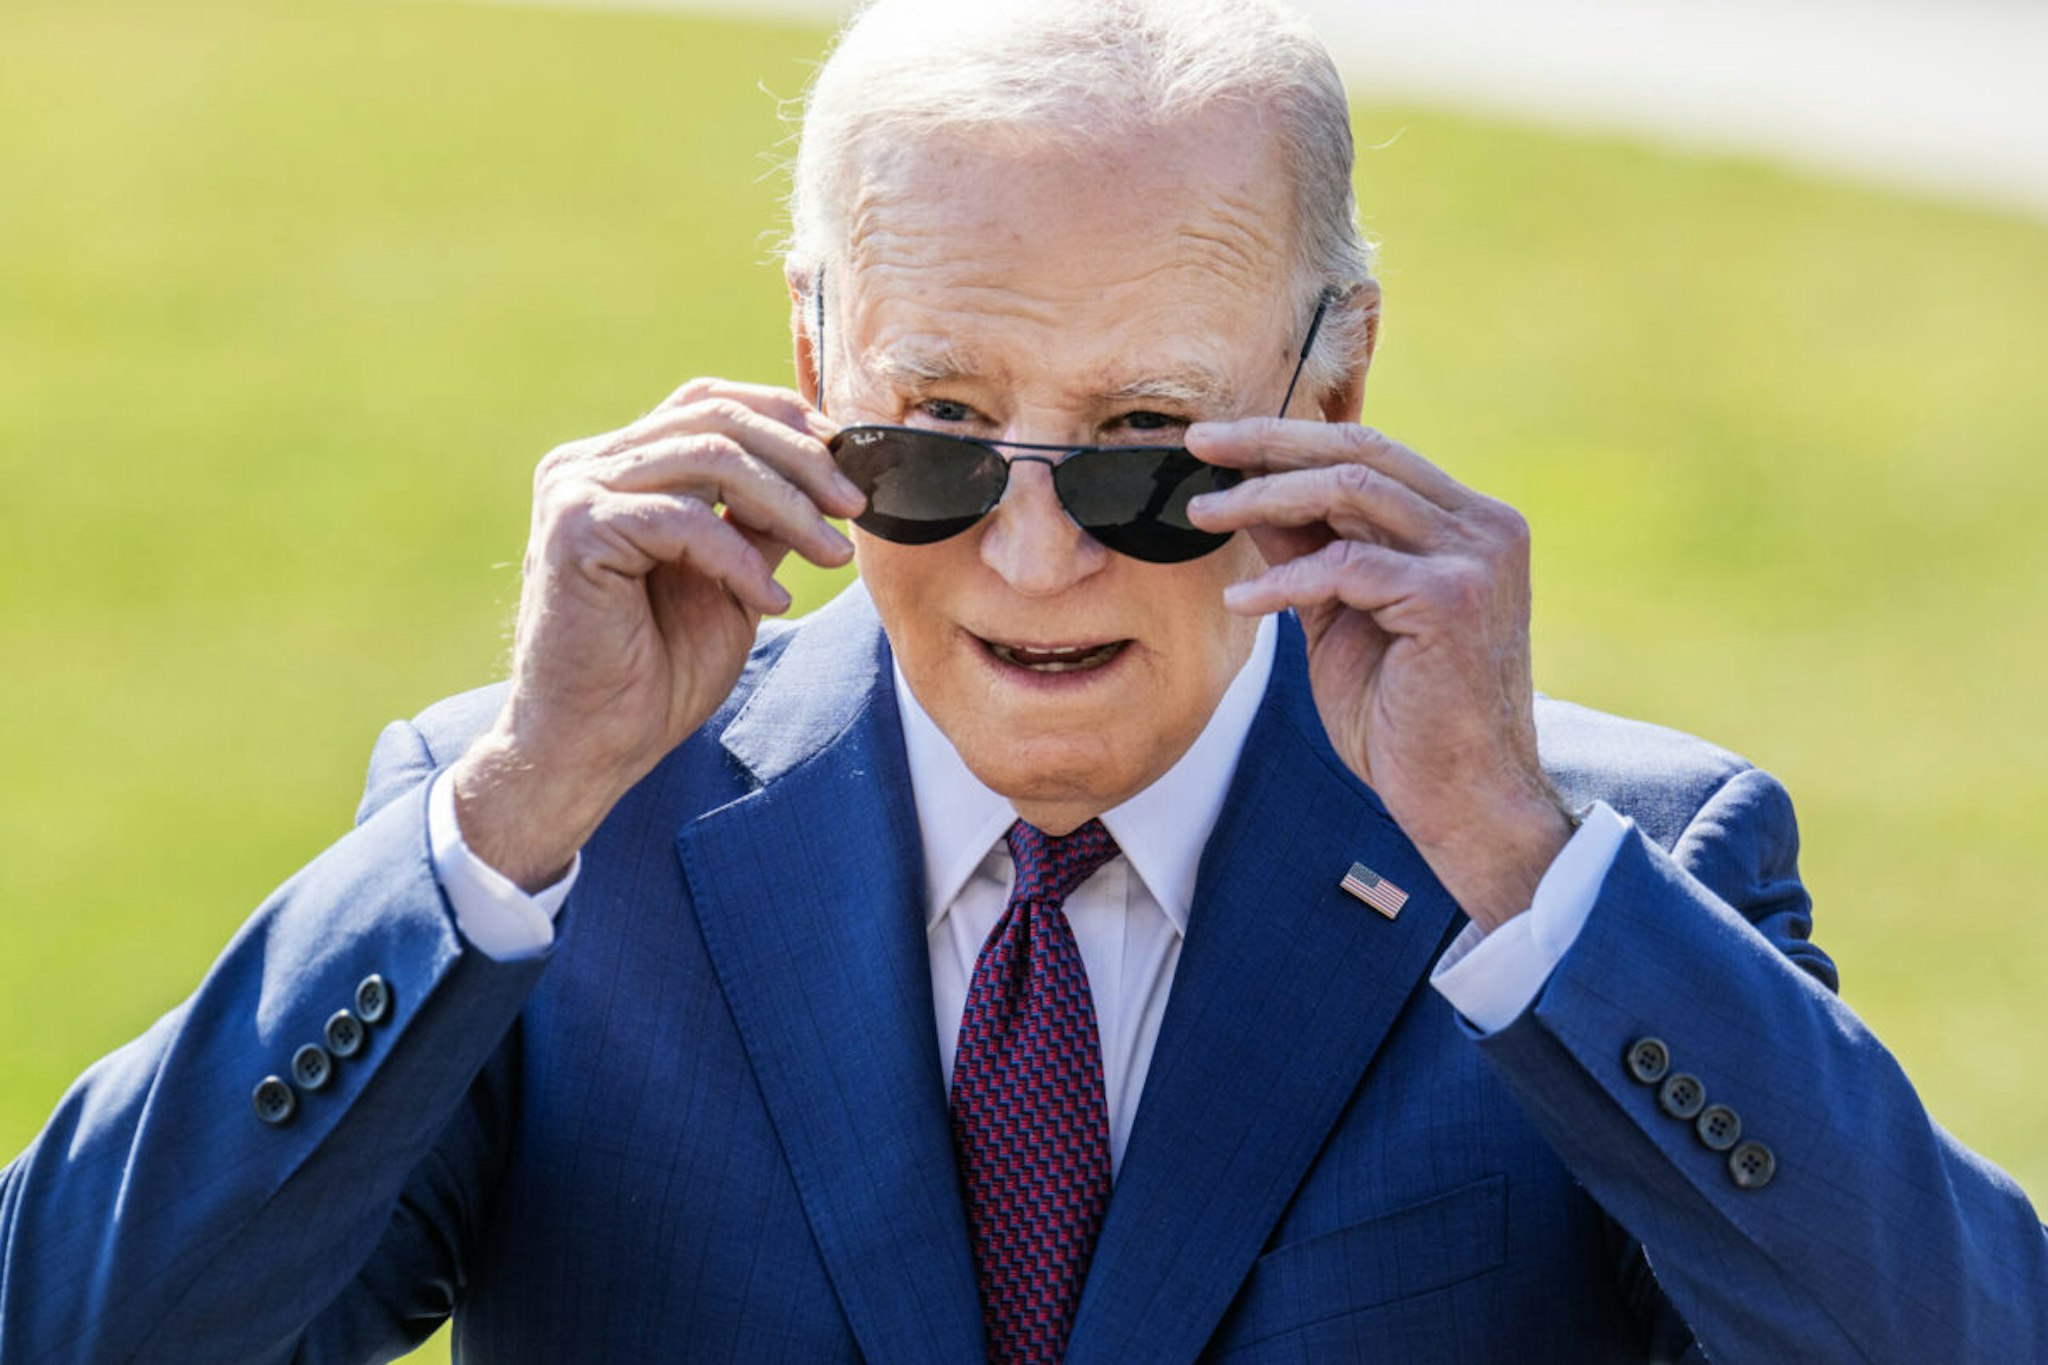 President Joe Biden addresses reporters on the South Lawn of the White House before boarding Marine One for a trip to Los Angeles for a campaign reception on Tuesday, February 20, 2024.